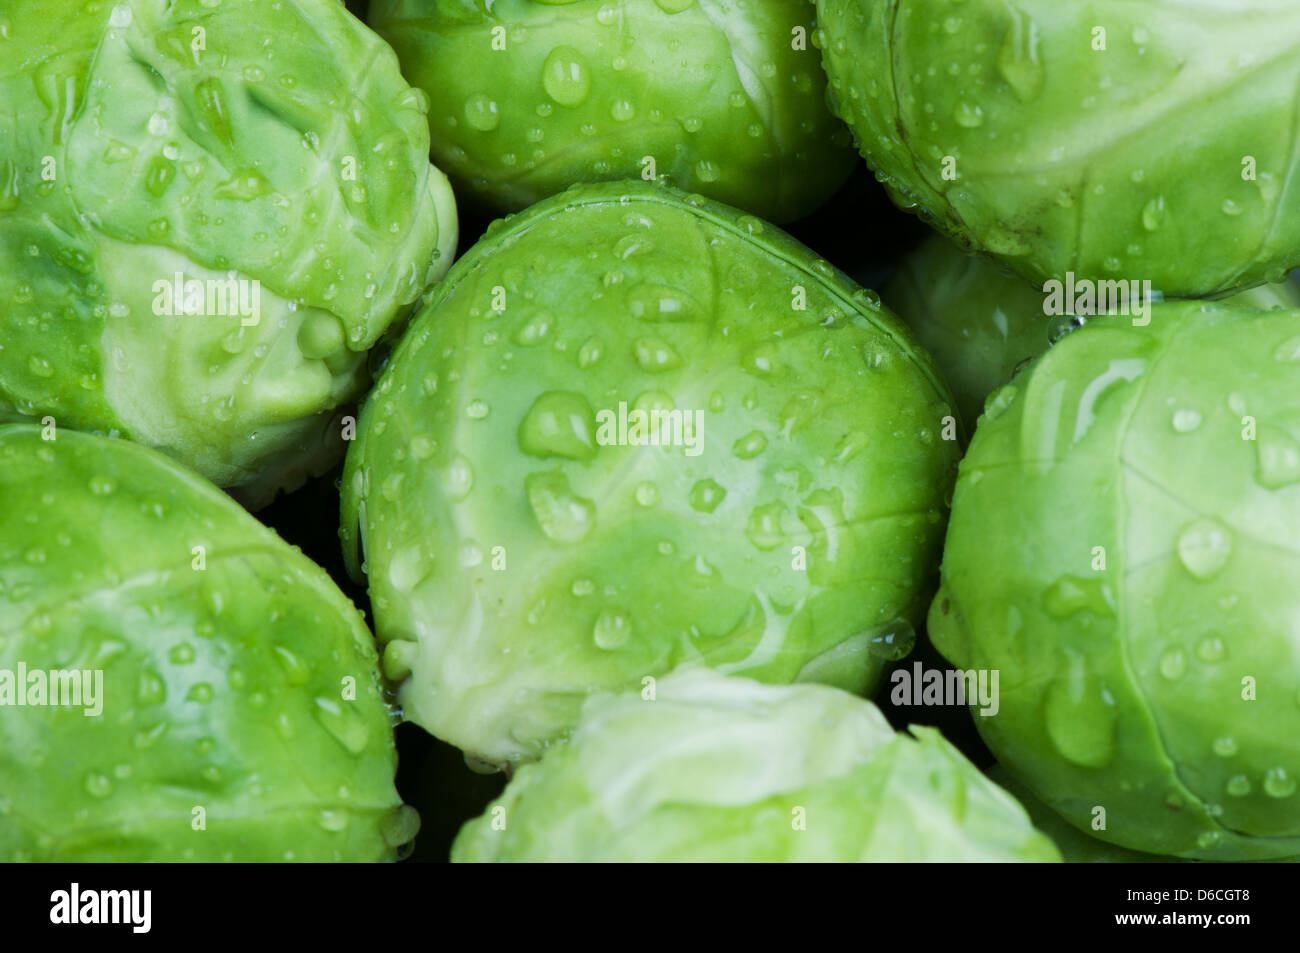 Brussels sprouts background Stock Photo